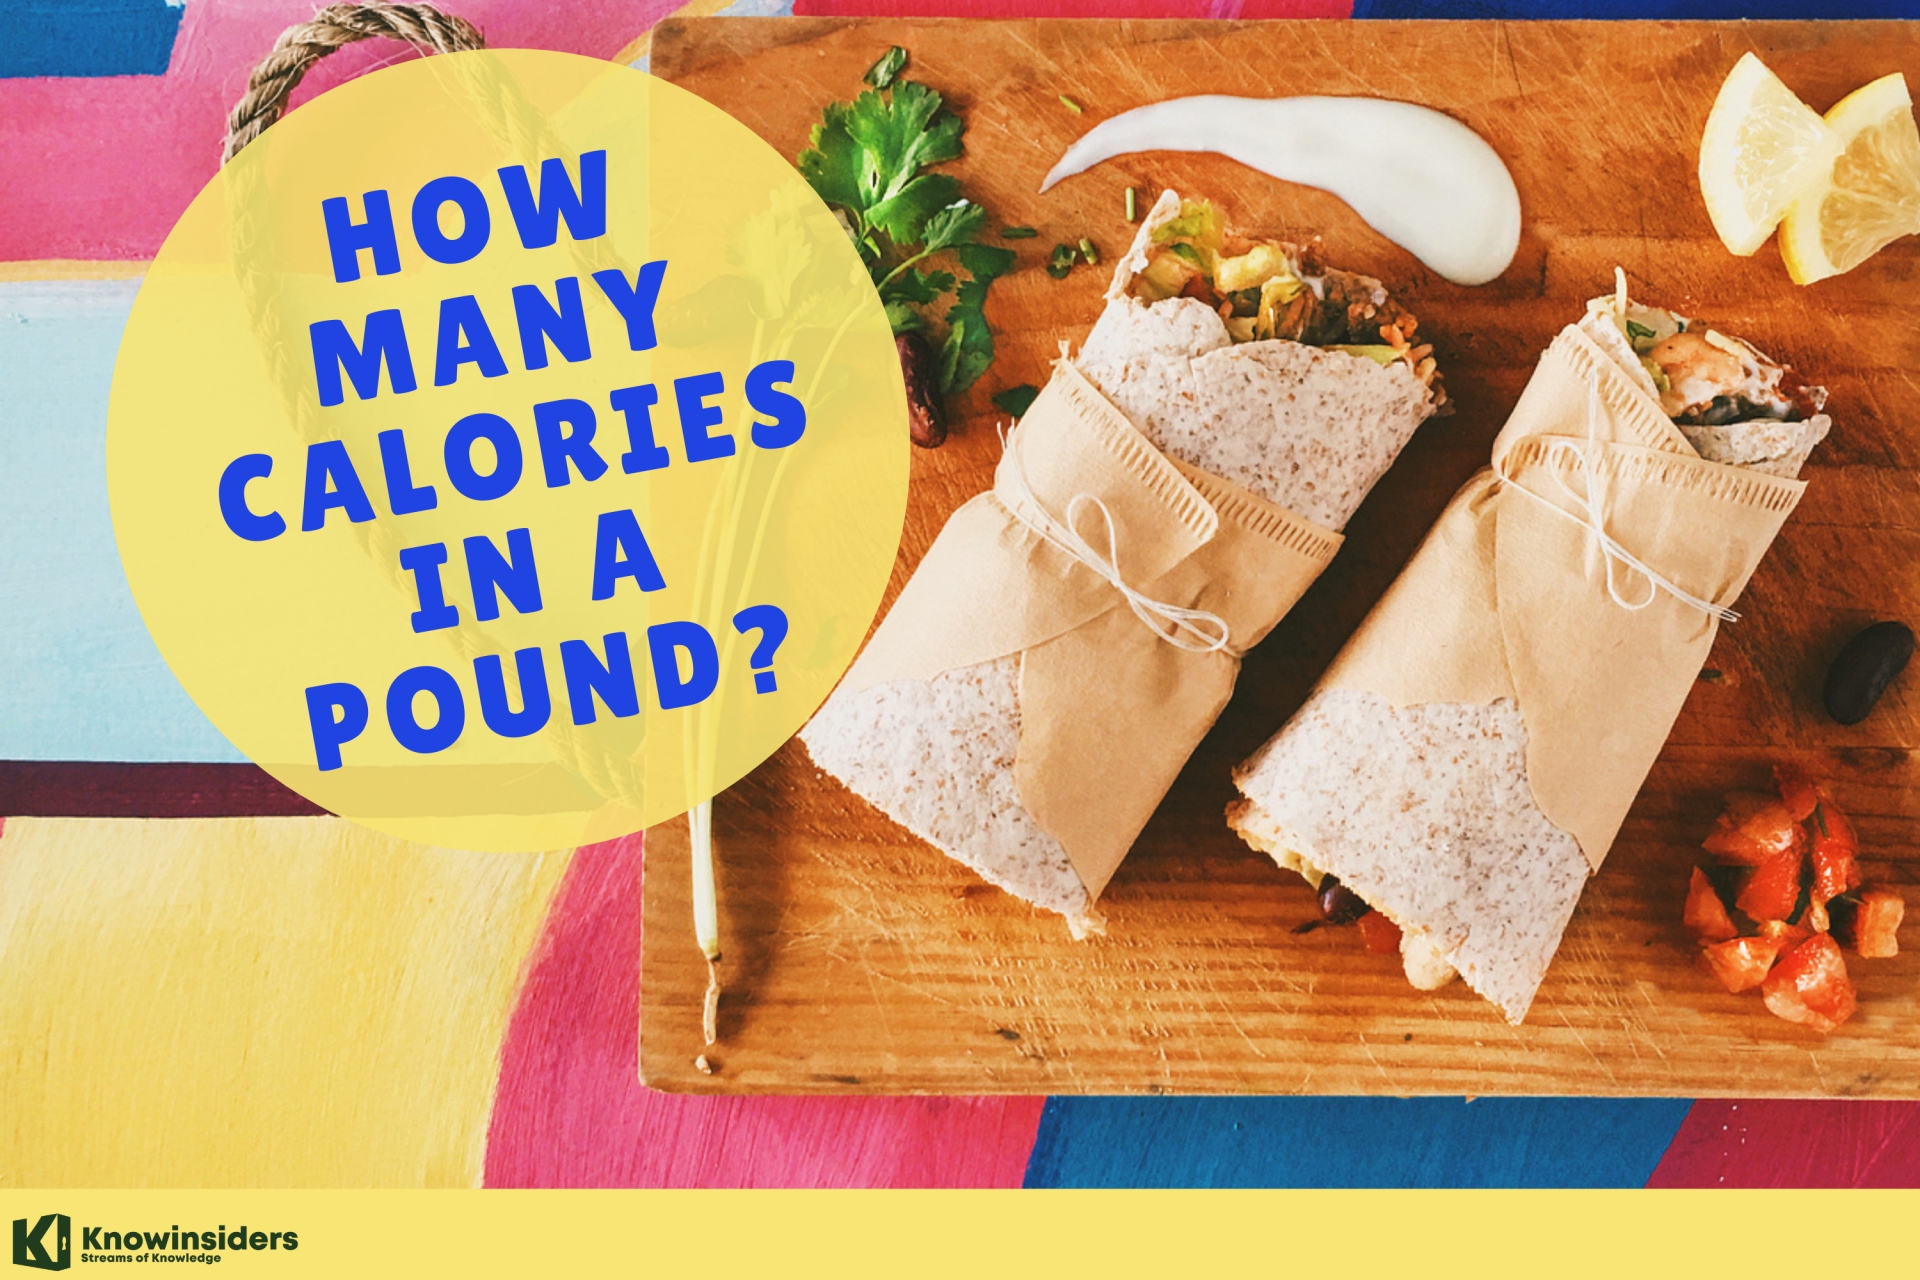 How Many Calories In A Pound?